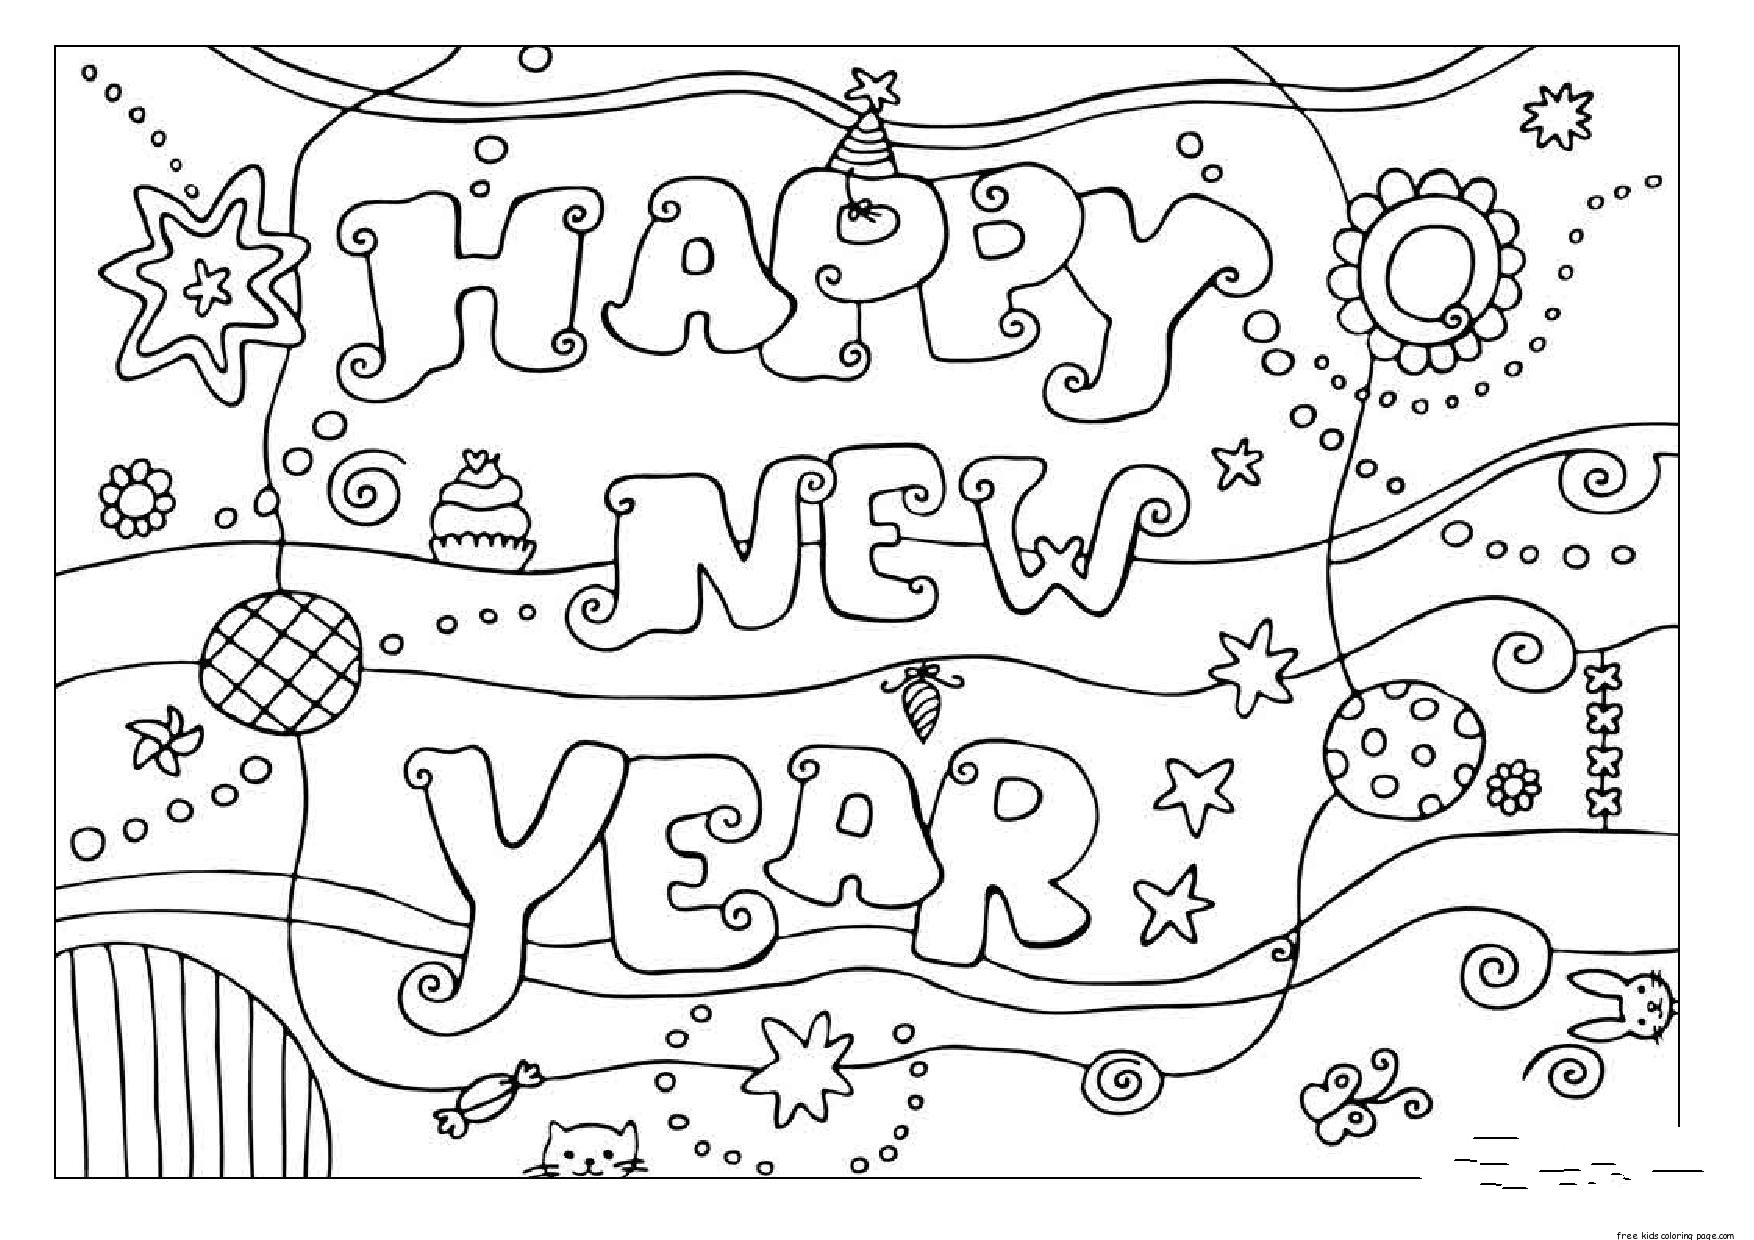 377 Simple Free Printable New Years Coloring Pages with Animal character